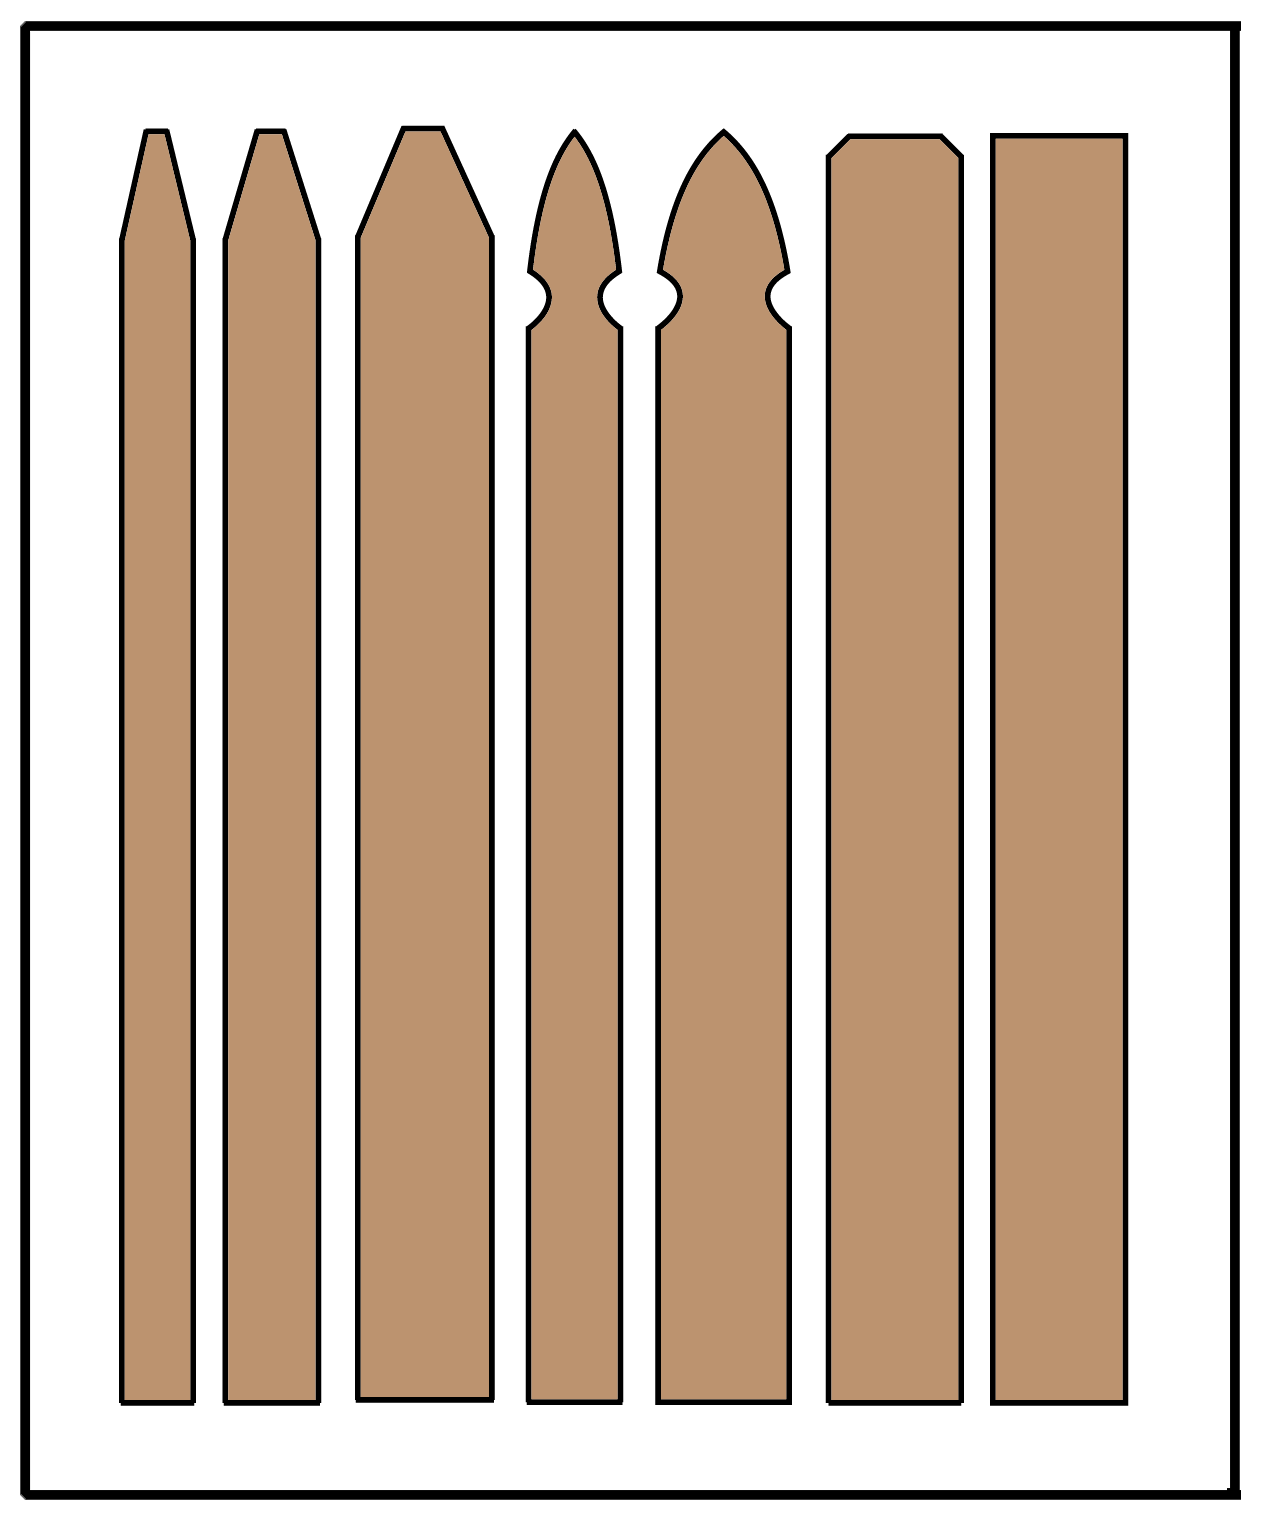 Illustration showing common fence picket styles